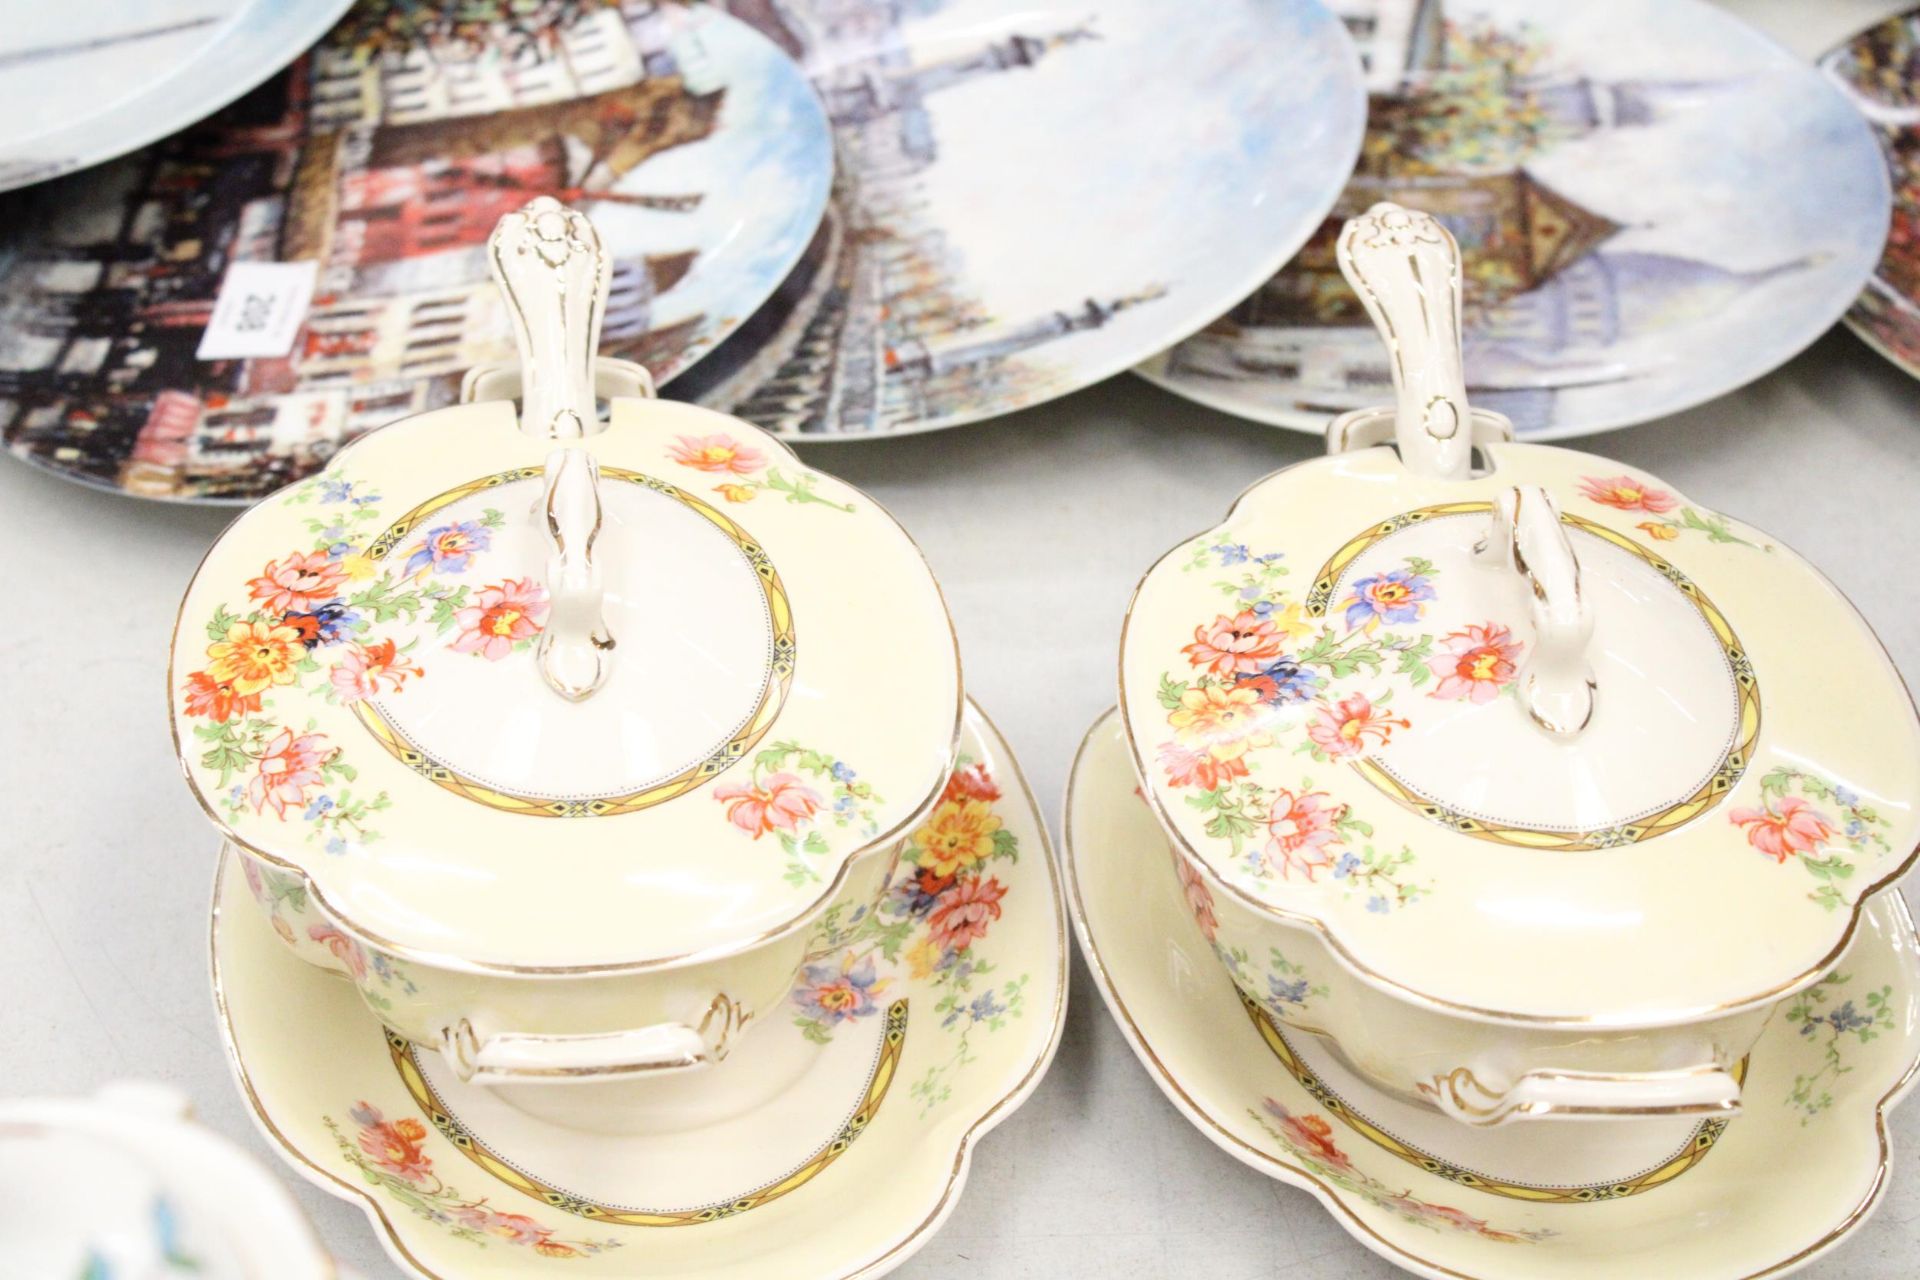 TWO VINTAGE JOHNSON BROS 'PAREEK', SMALL LIDDED TUREENS WITH SAUCERS AND LADELS - Image 4 of 6